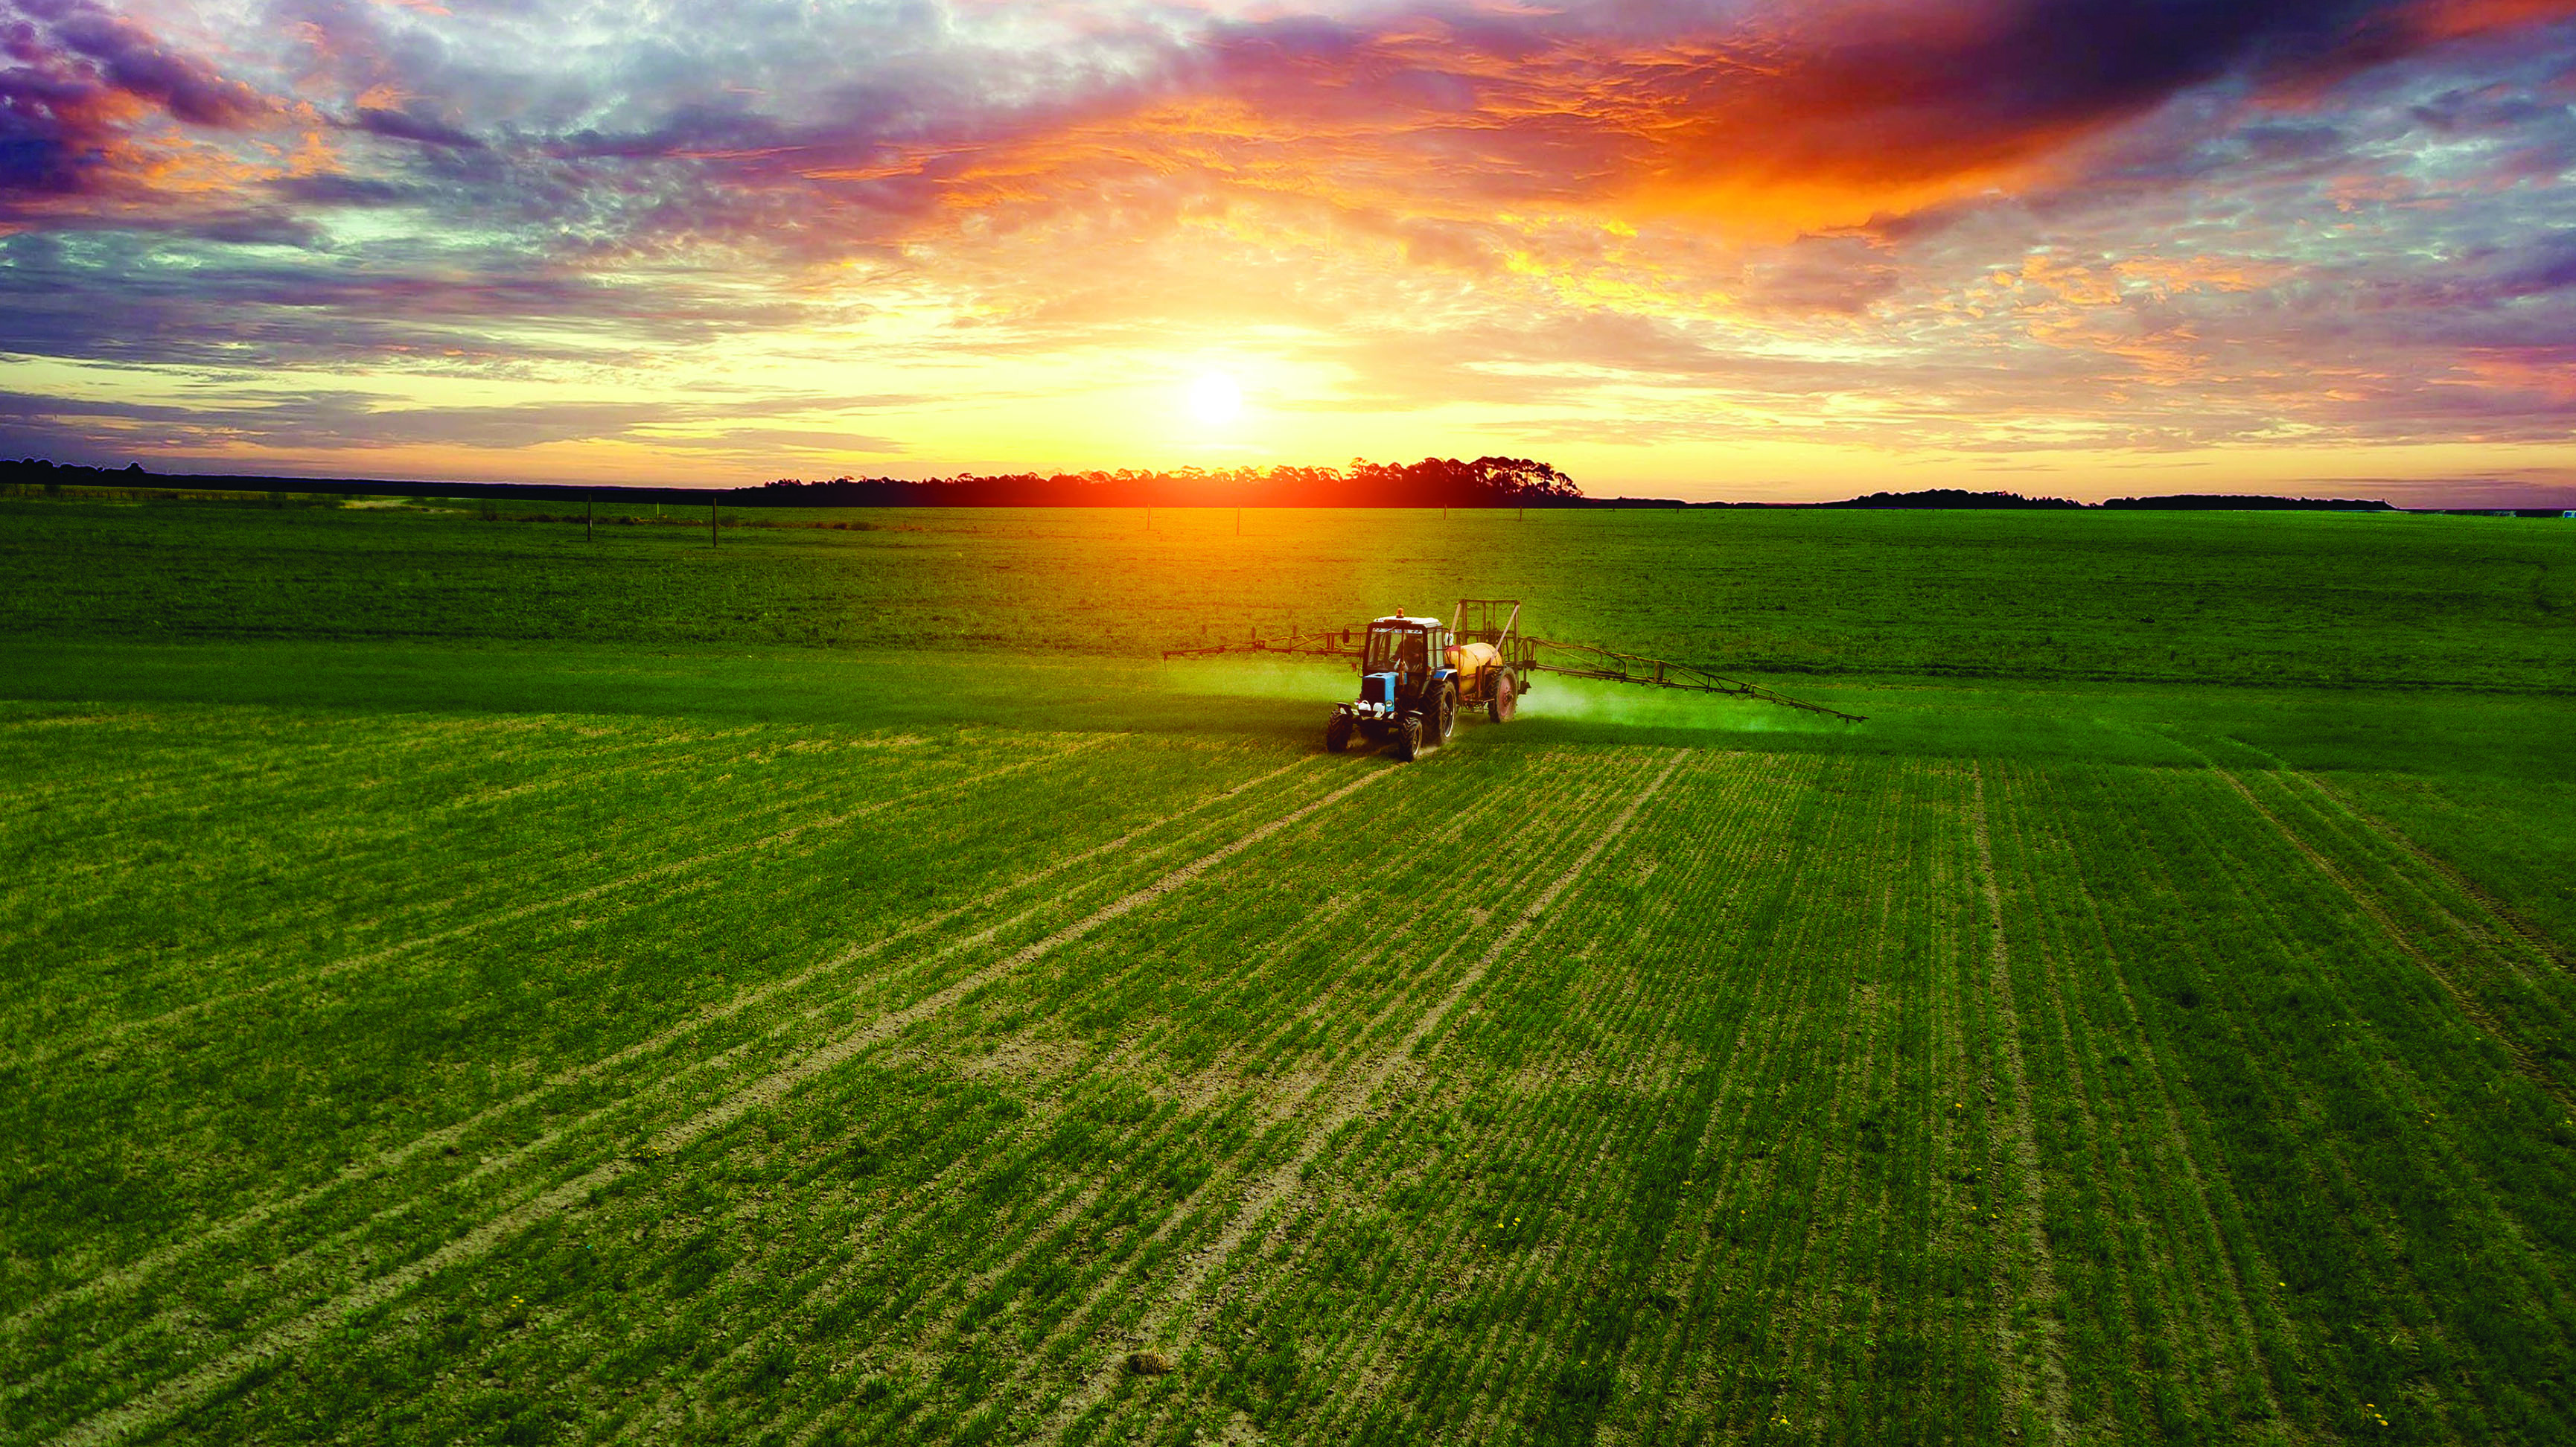 A tractor in a farm field at sunset.